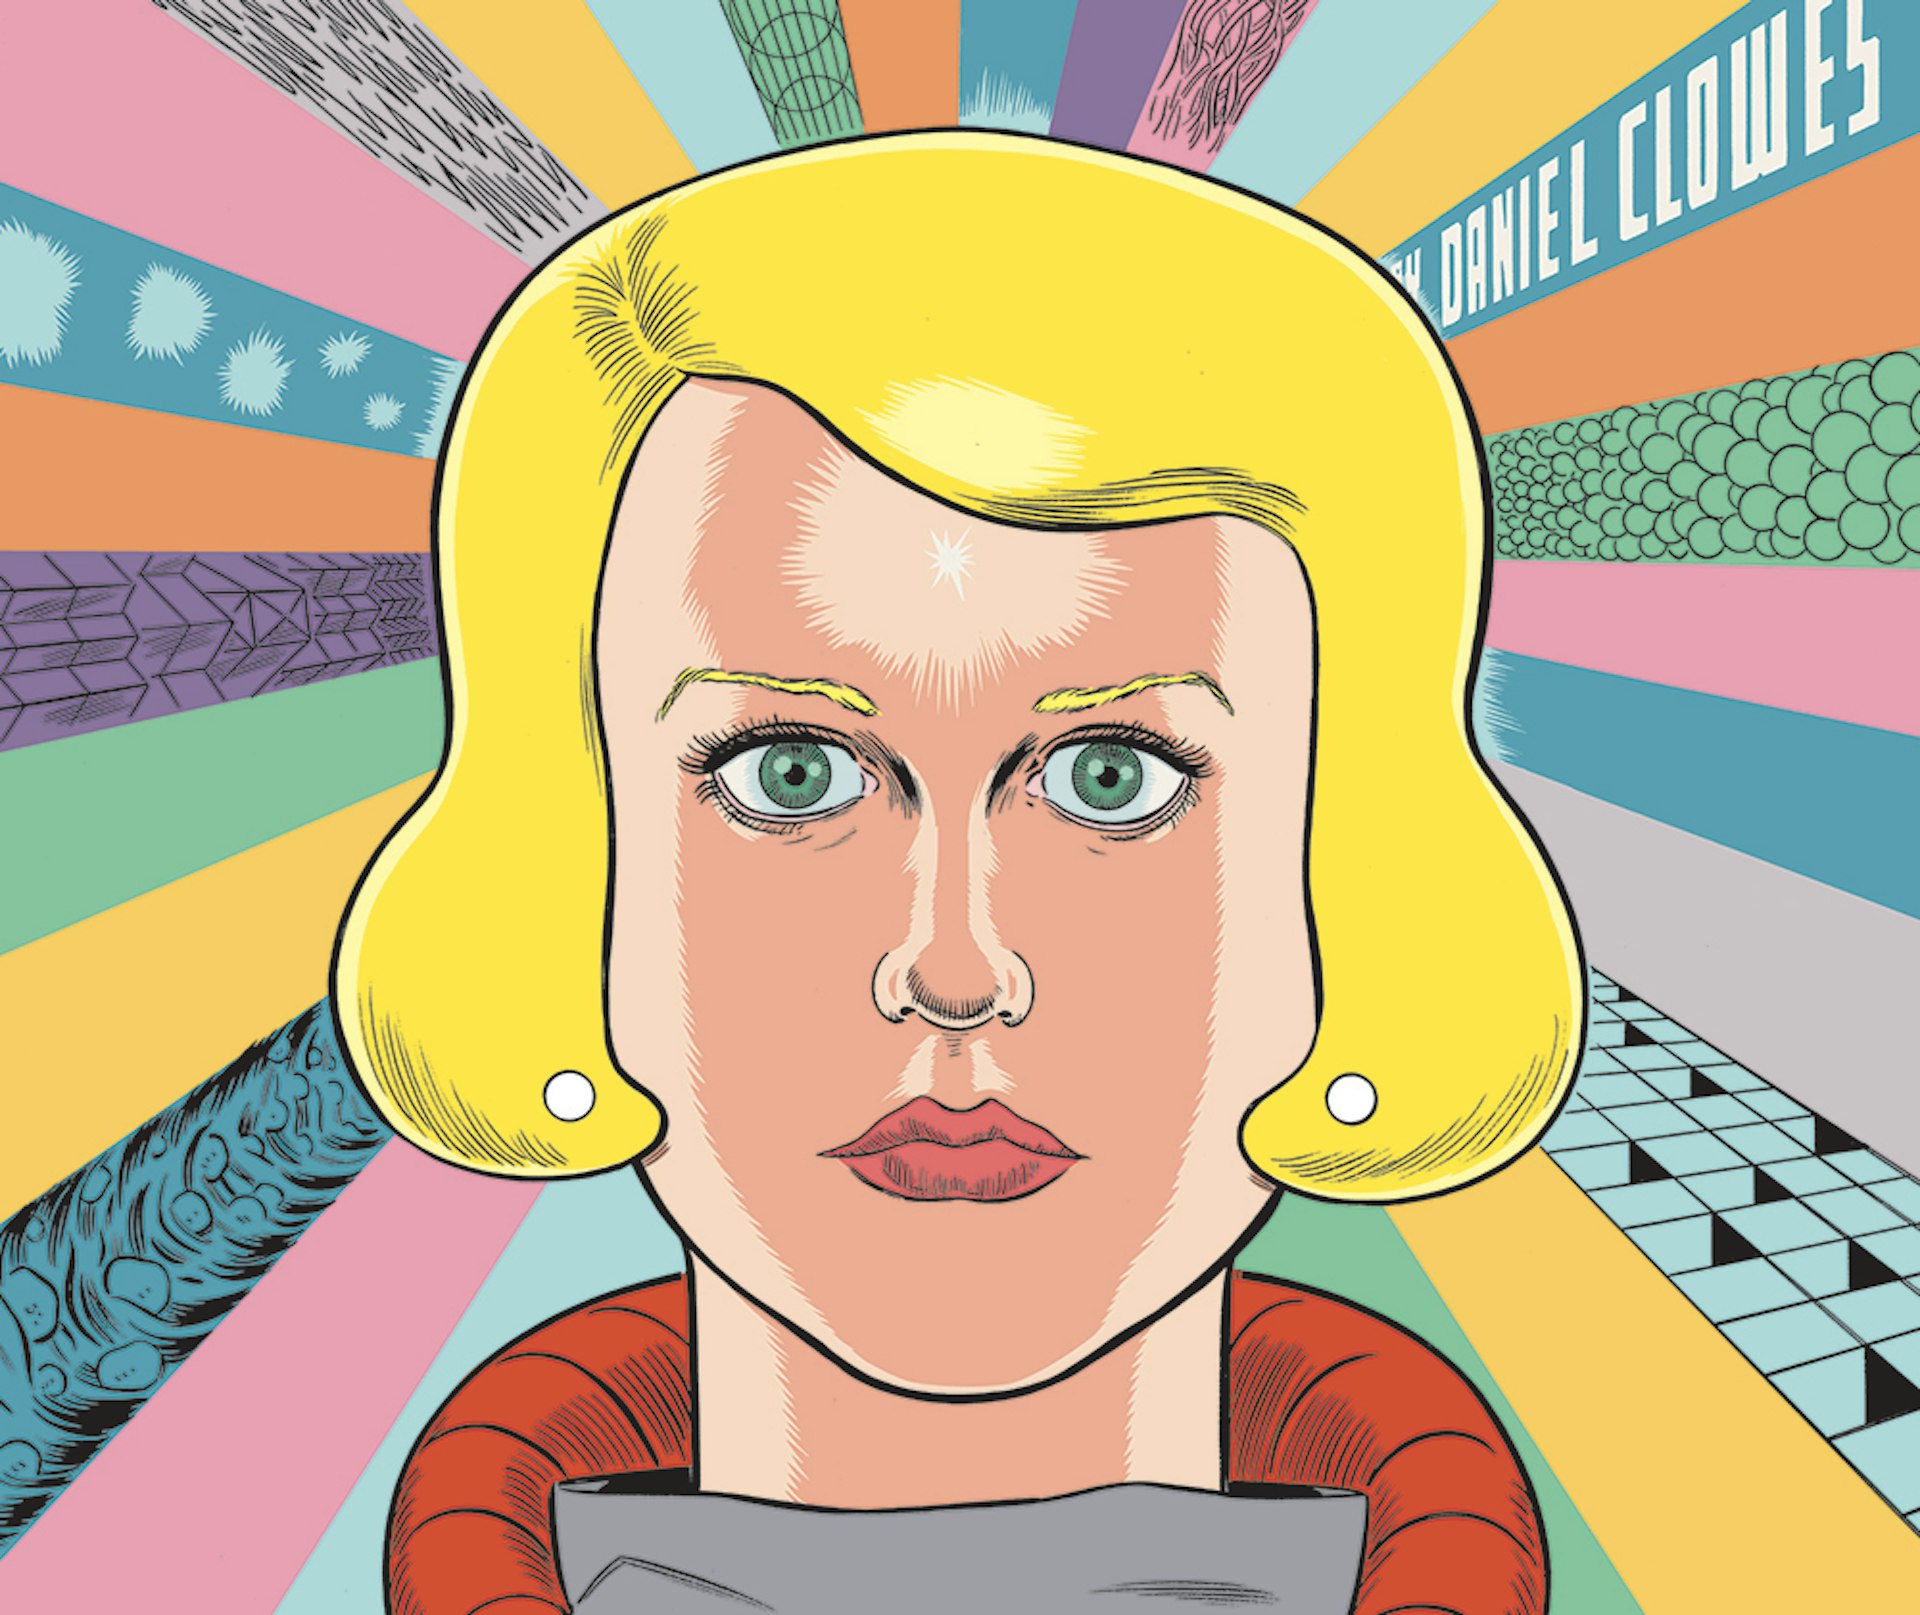 The tortured adolescent hope of Daniel Clowes